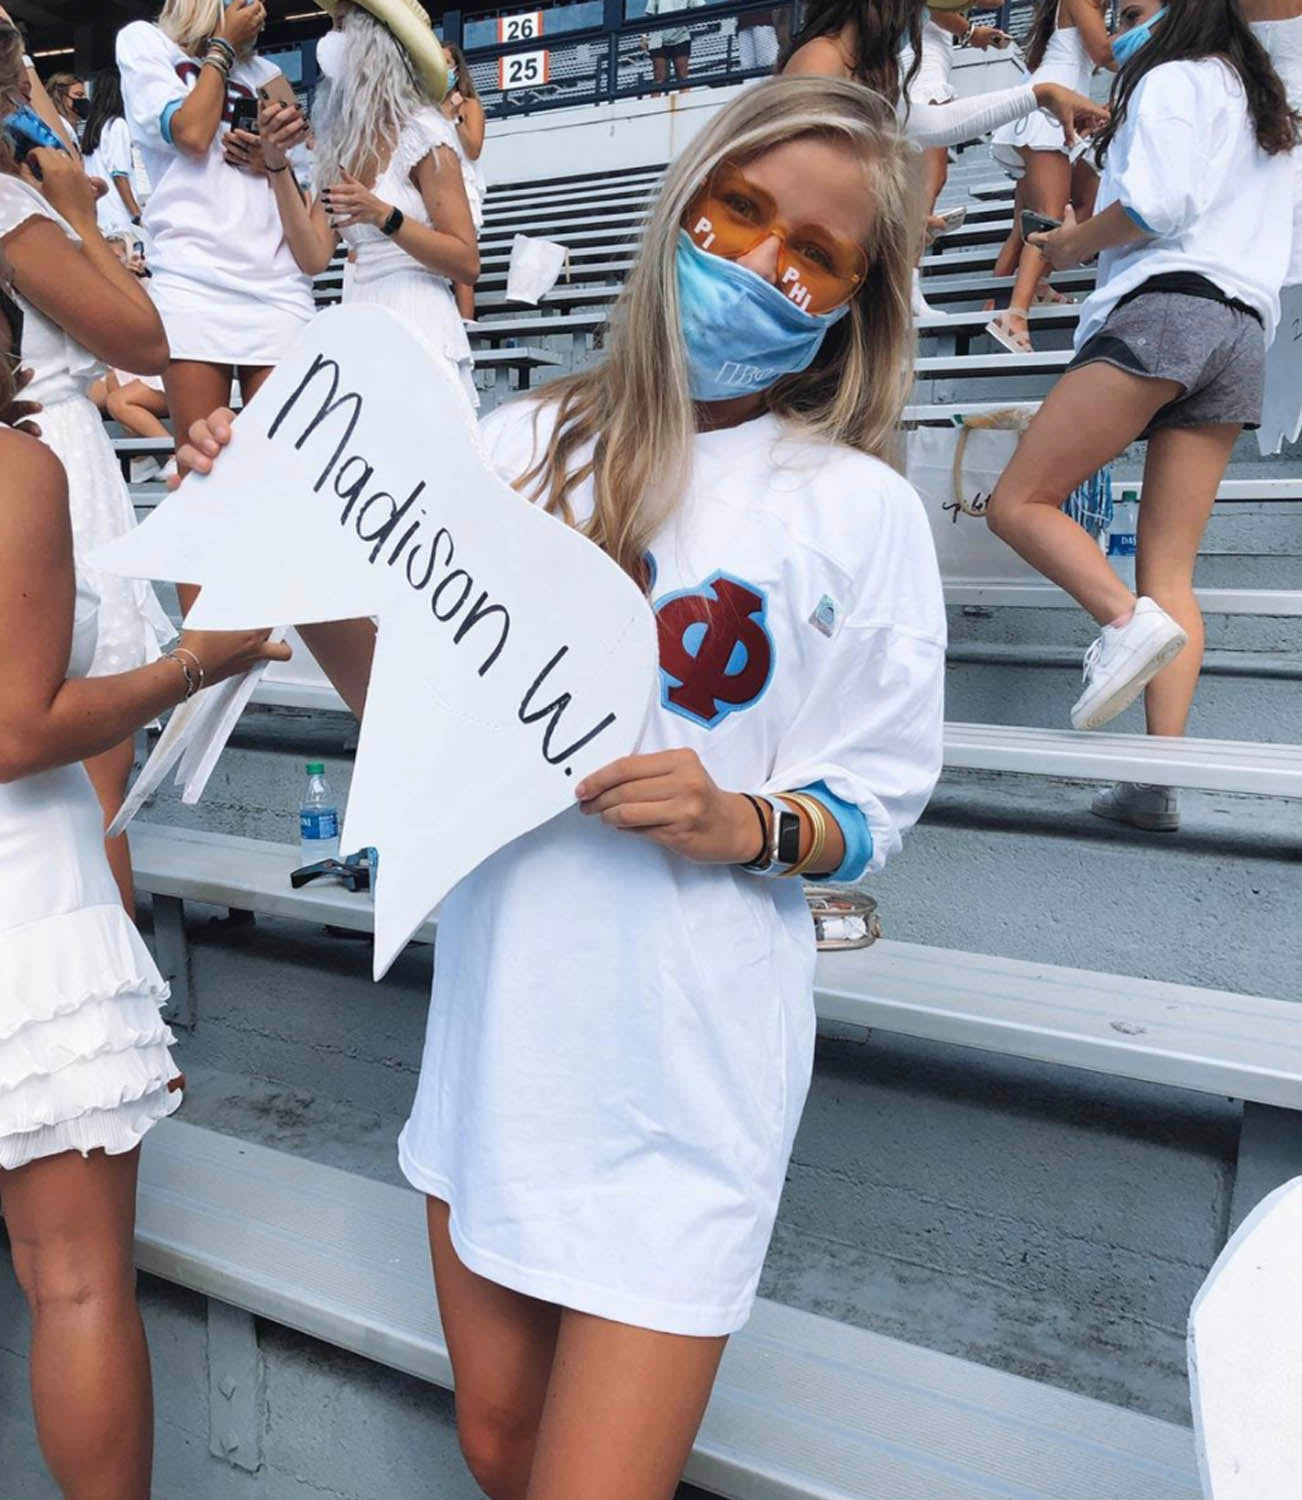 Girl at Auburn University game holding a sign